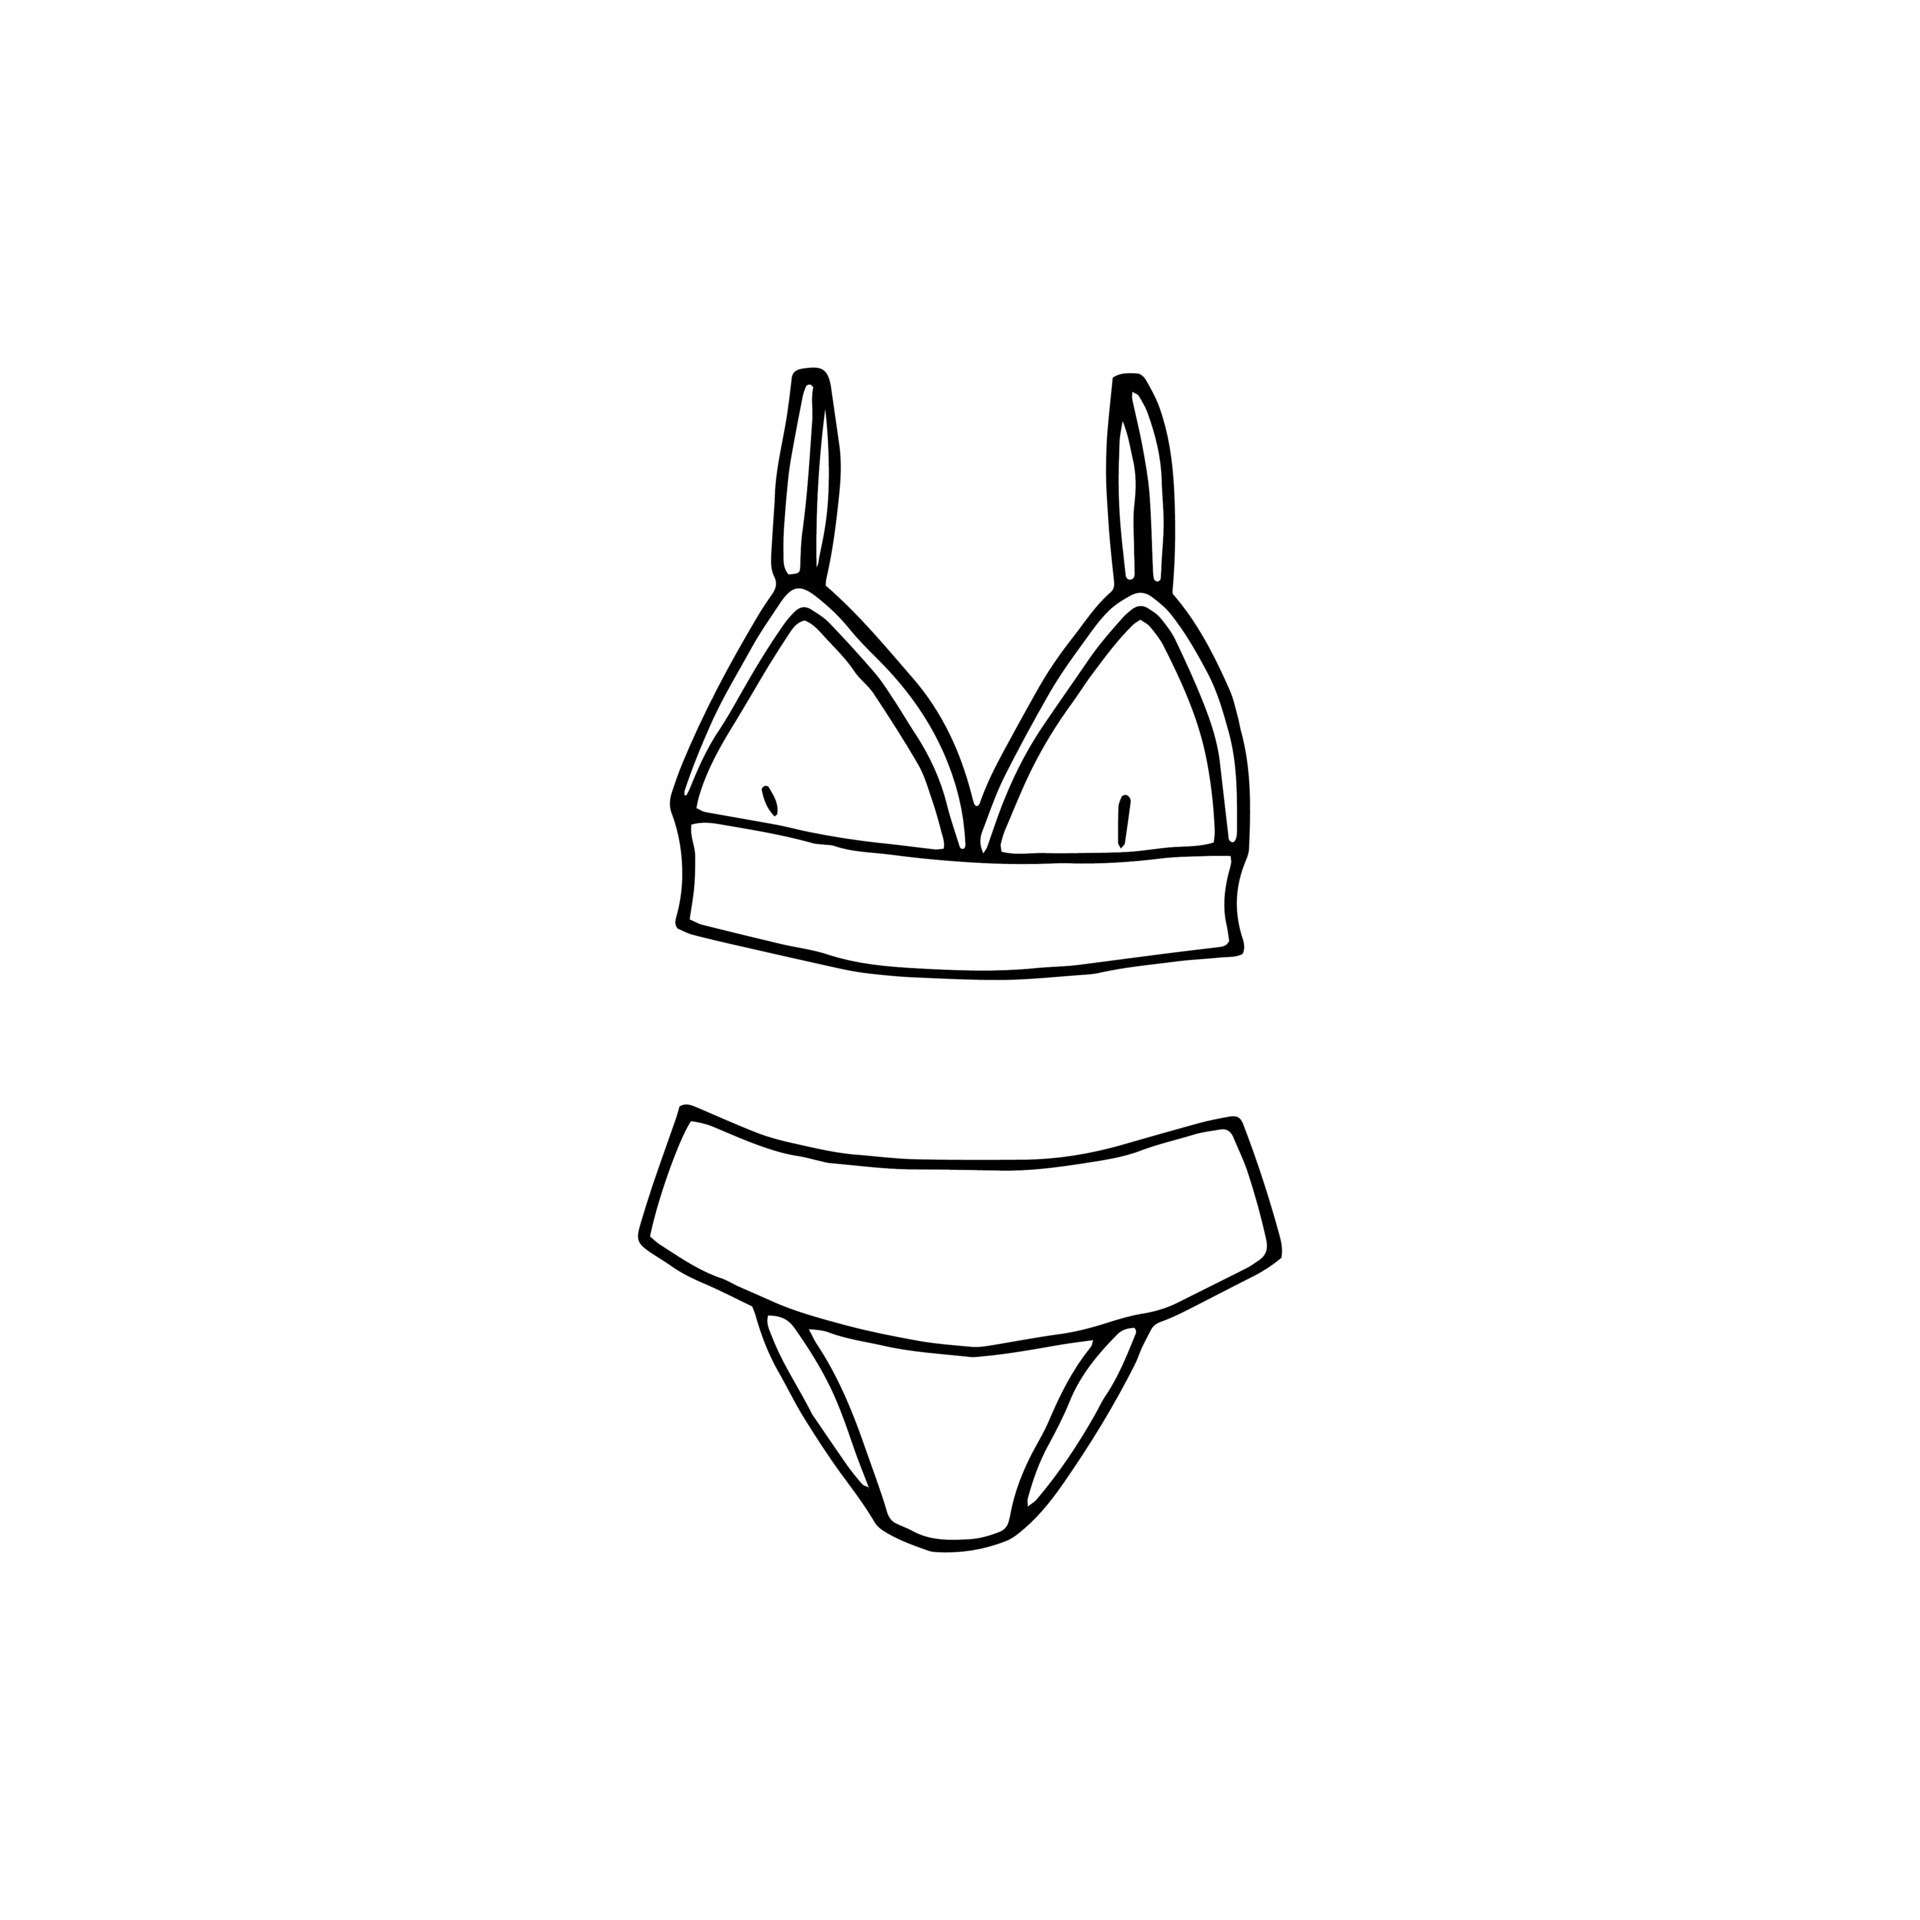 Female underwear collection in hand drawn doodle style. Female